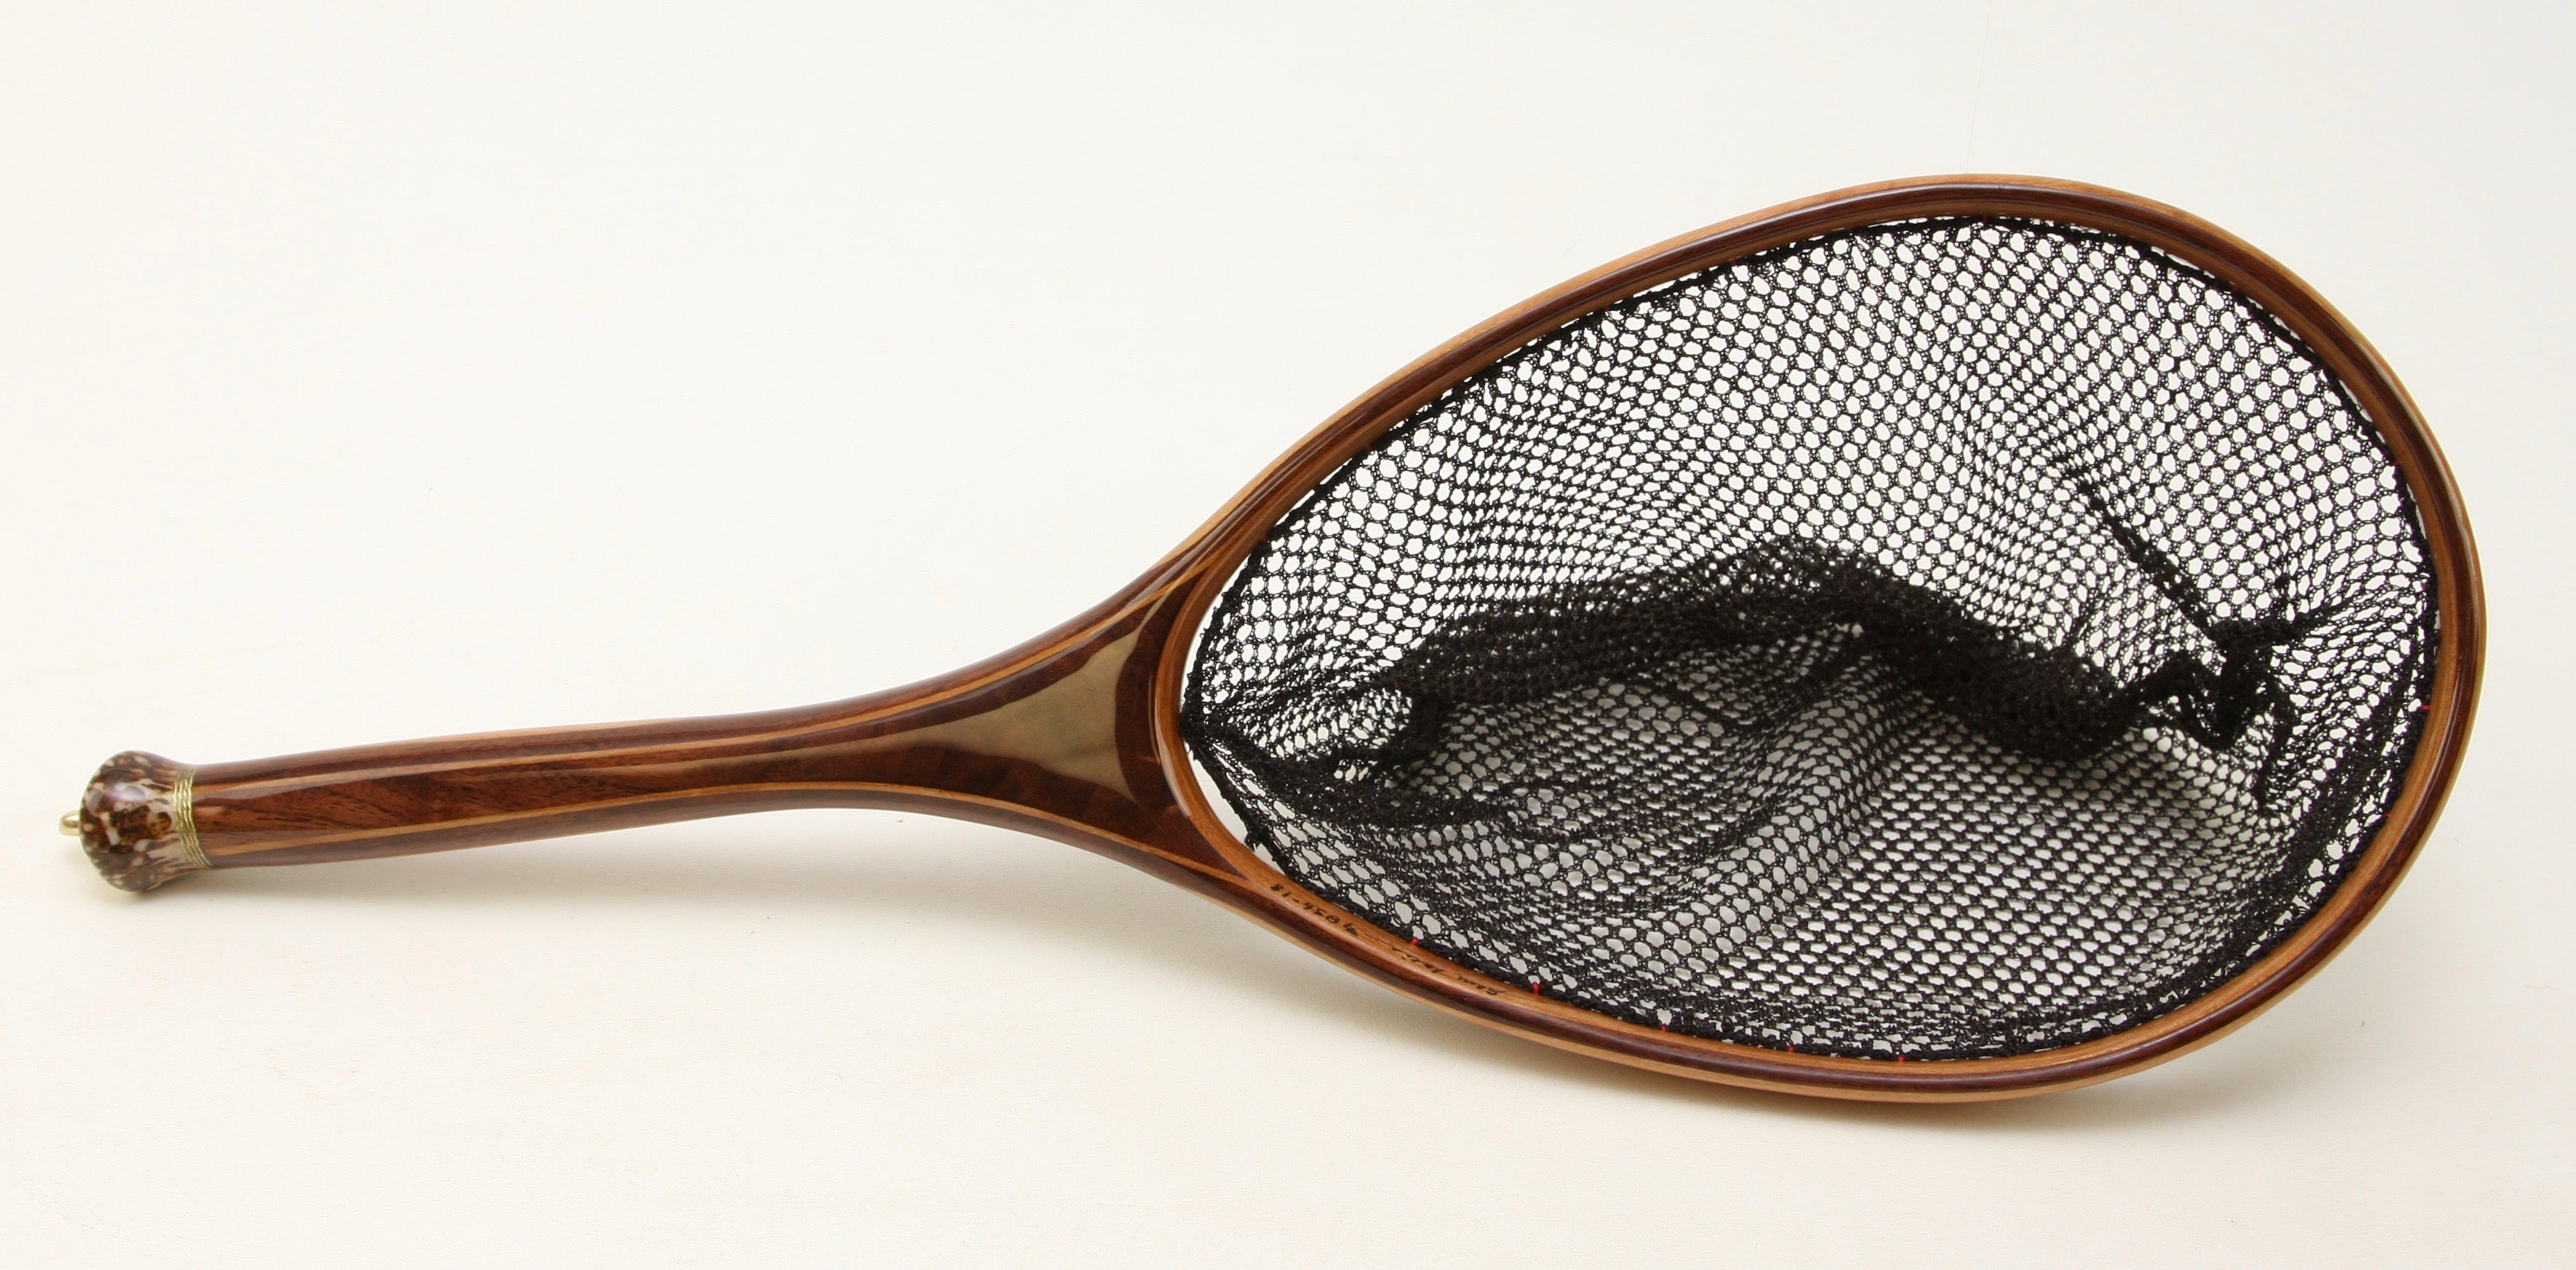 Small Elegance: Custom Landing Net with Walnut, Cherry and Deer Antler -  Nets that Honor the Fish